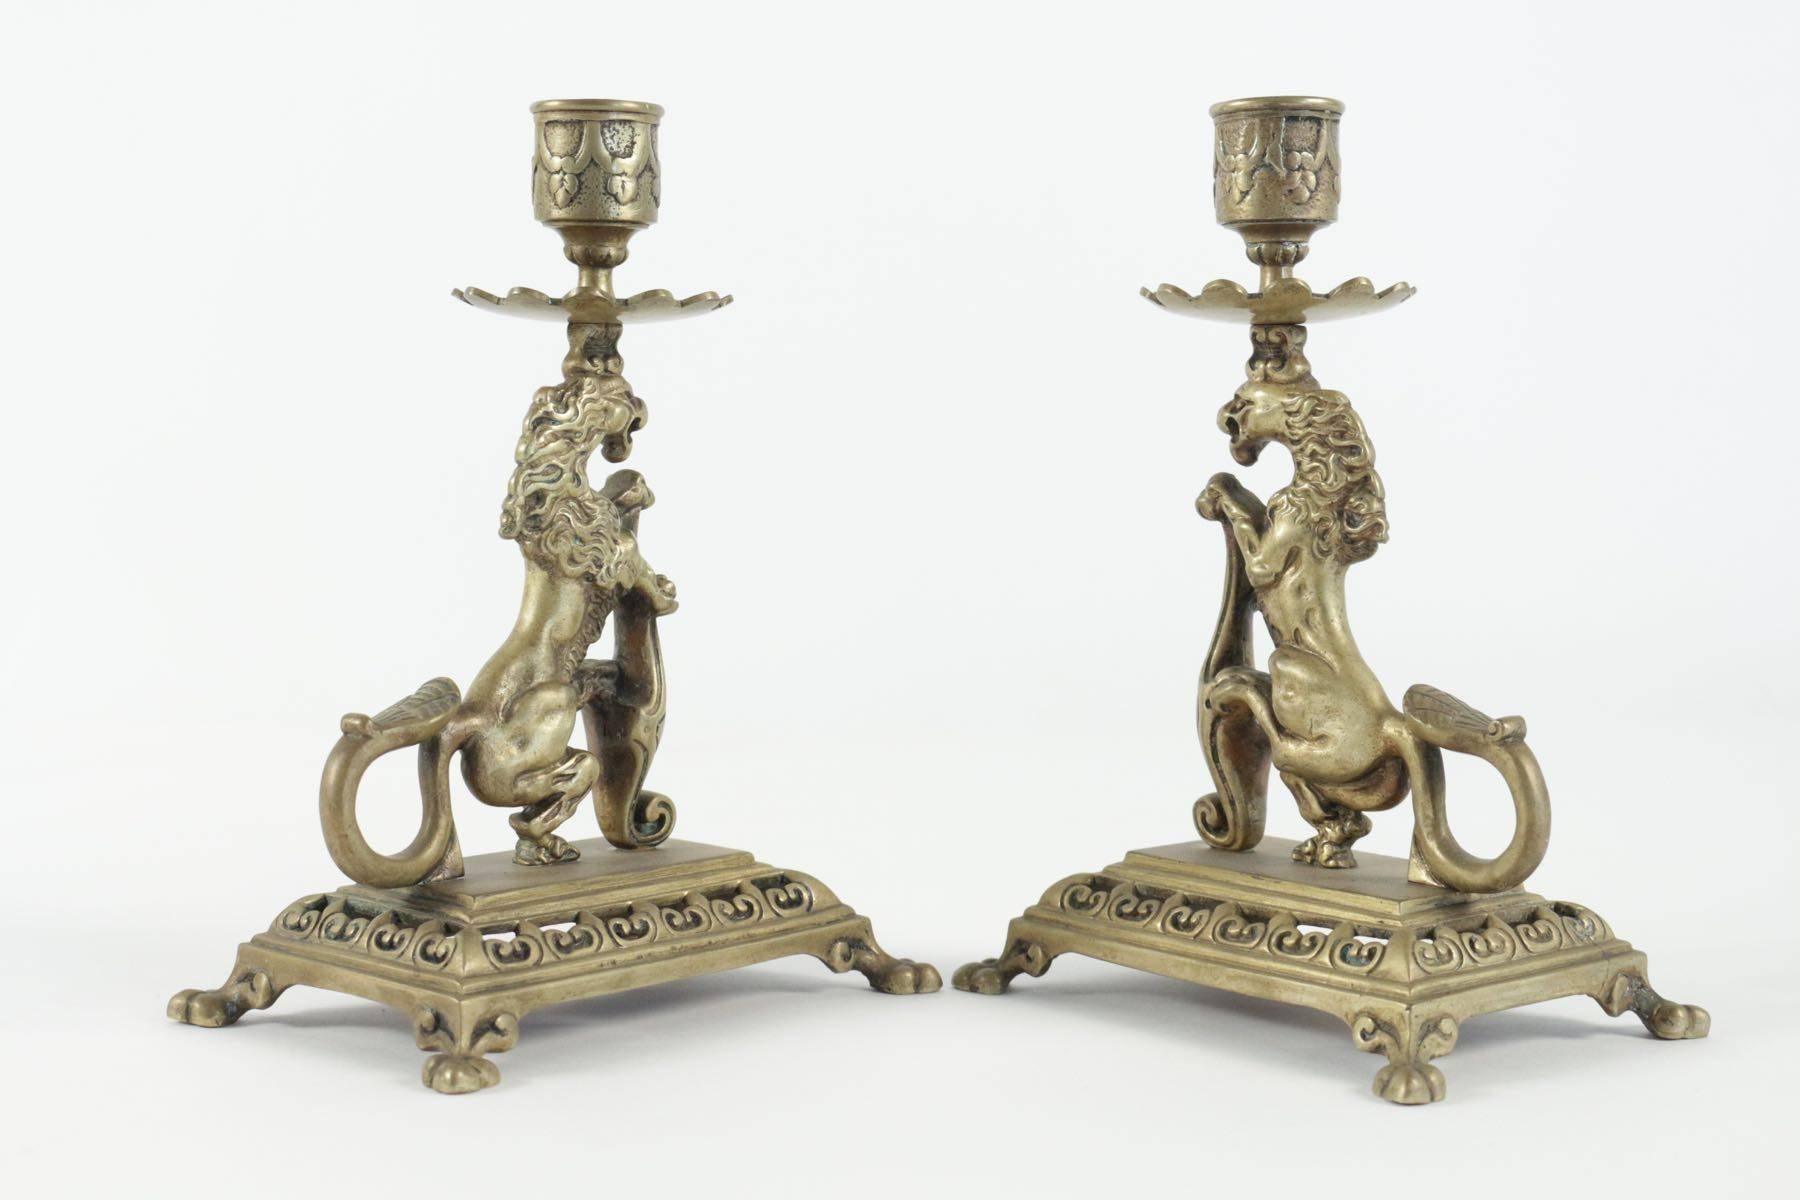 Napoleon III Pair of Candlesticks from the 19th Century in Bronze, Napoeon III Period For Sale